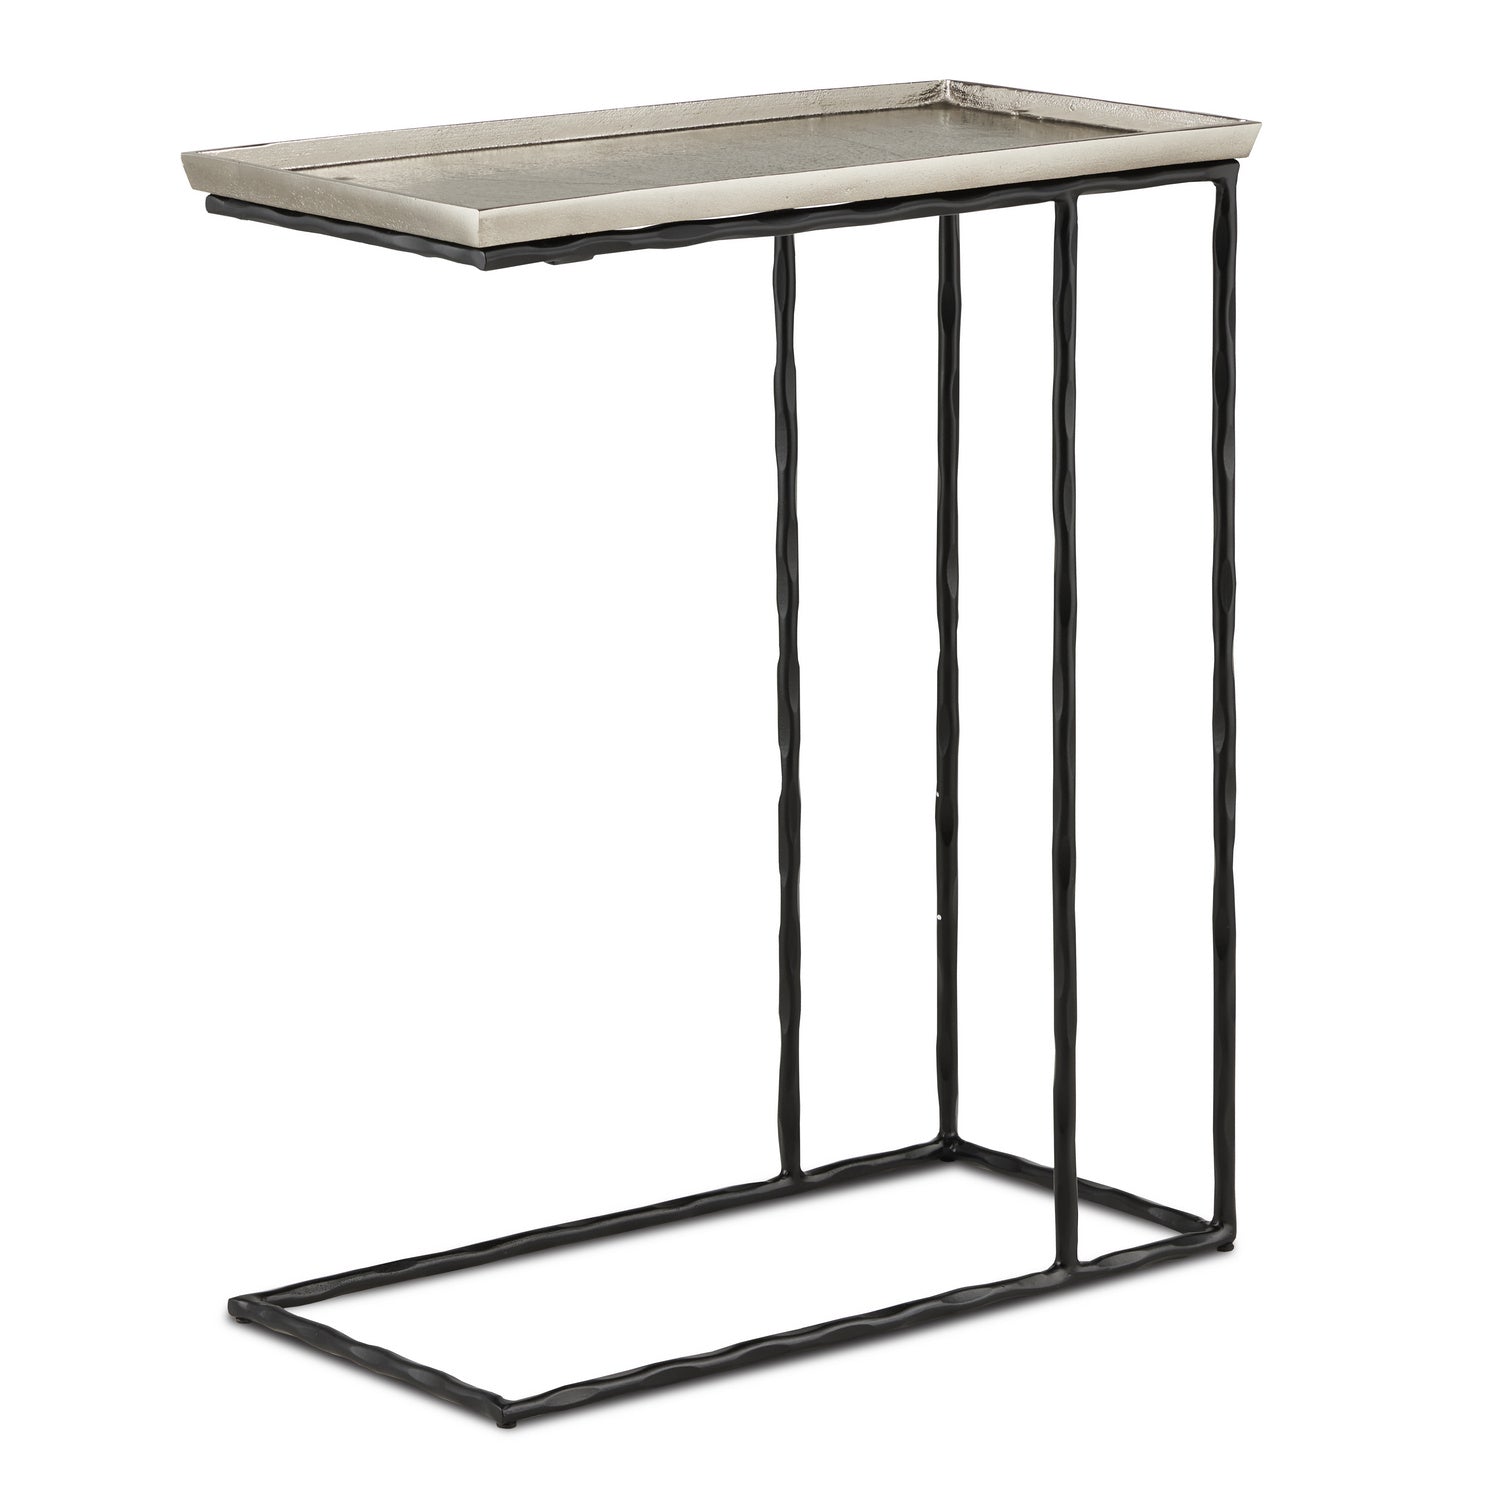 Table from the Boyles collection in Nickel/Black finish